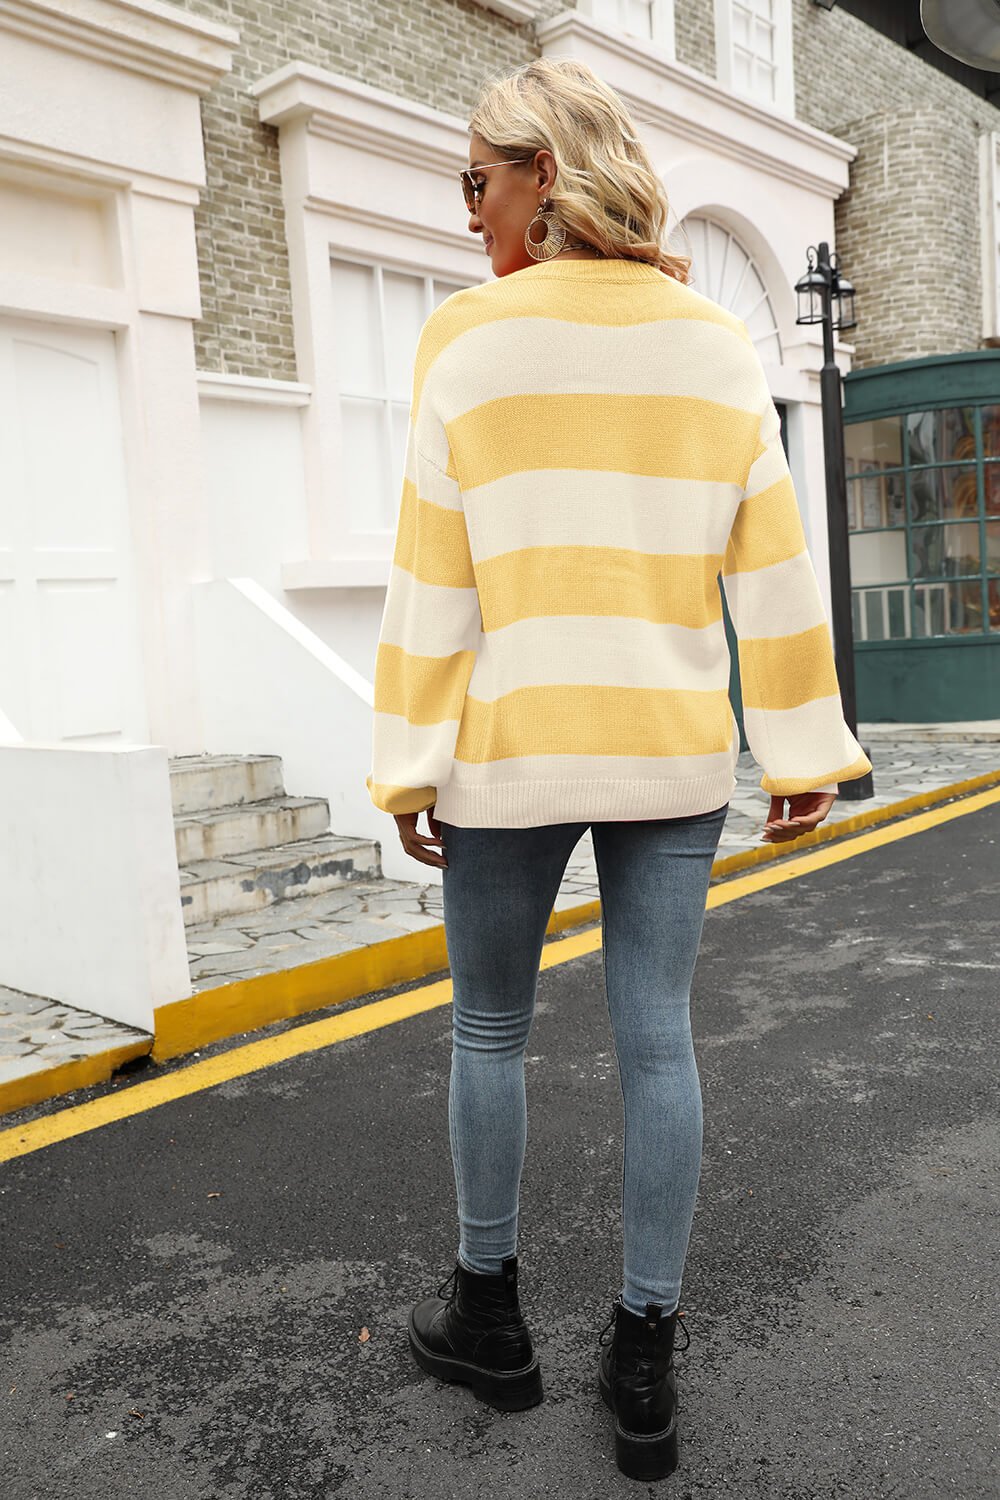 Striped Balloon Sleeve Knit Pullover  | KIKI COUTURE-Women's Clothing, Designer Fashions, Shoes, Bags